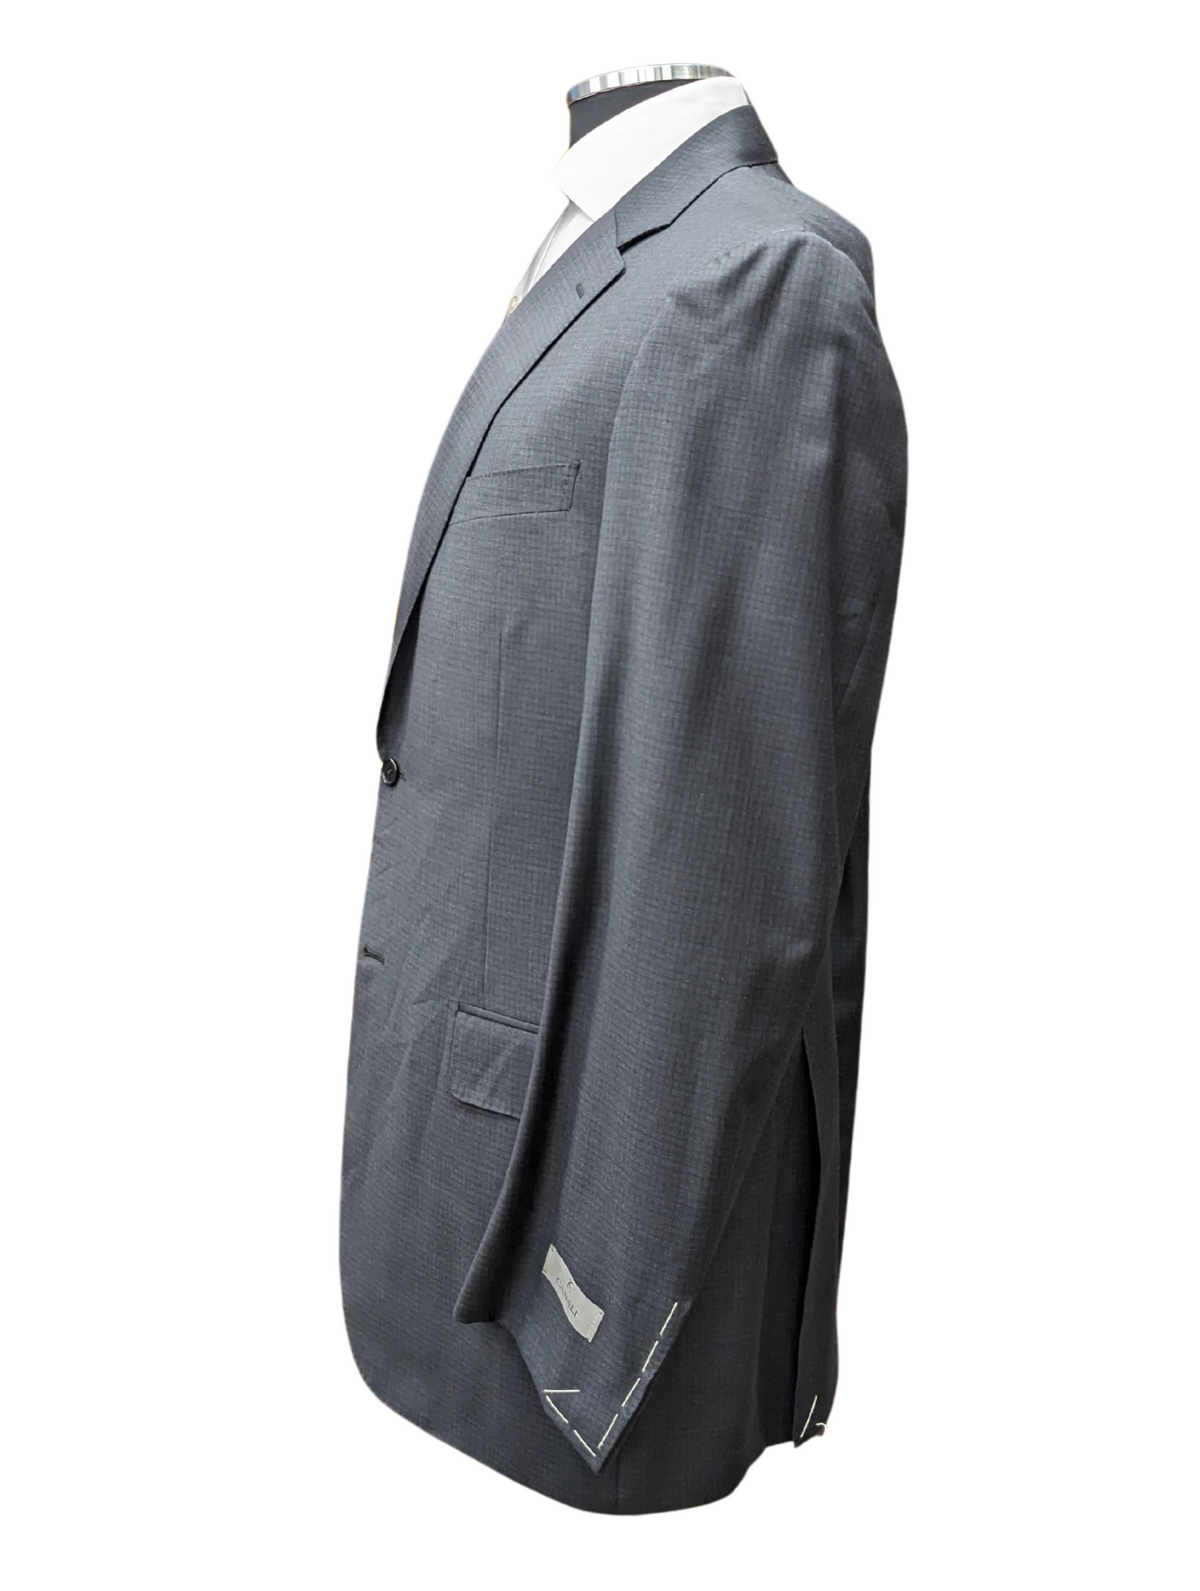 Canali 1934 Mens Charcoal Gray Check 44L Drop 7 100% Wool 2 Button 2 Piece Suit